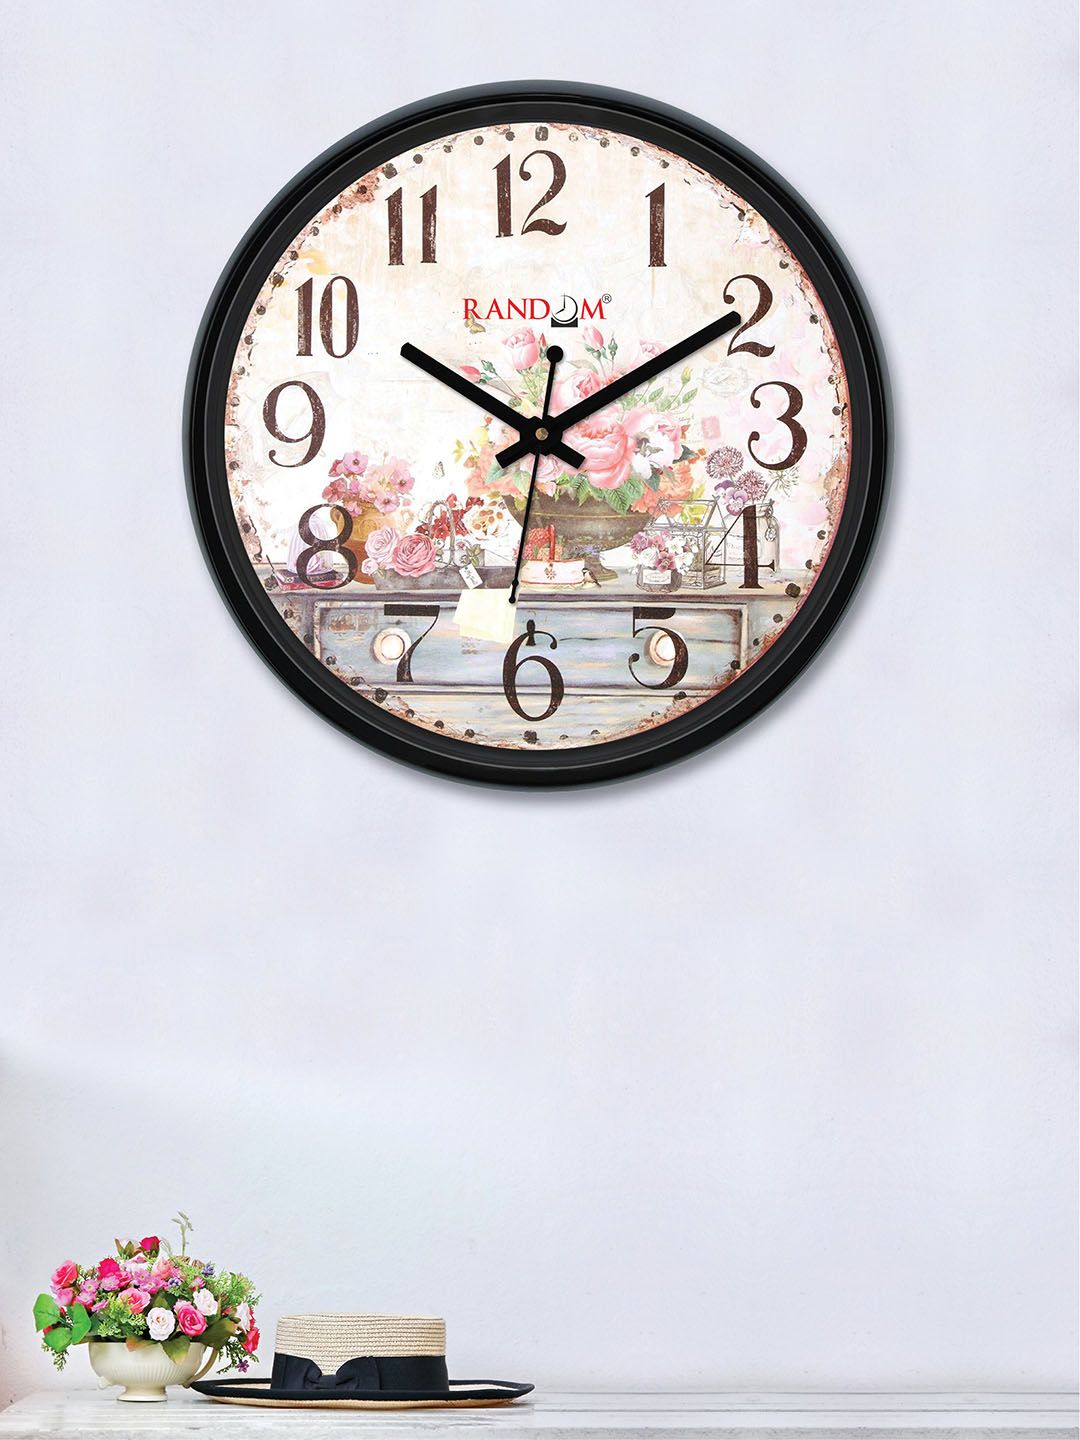 RANDOM Off-White & Multicoloured Round Printed 30 cm Analogue Wall Clock Price in India